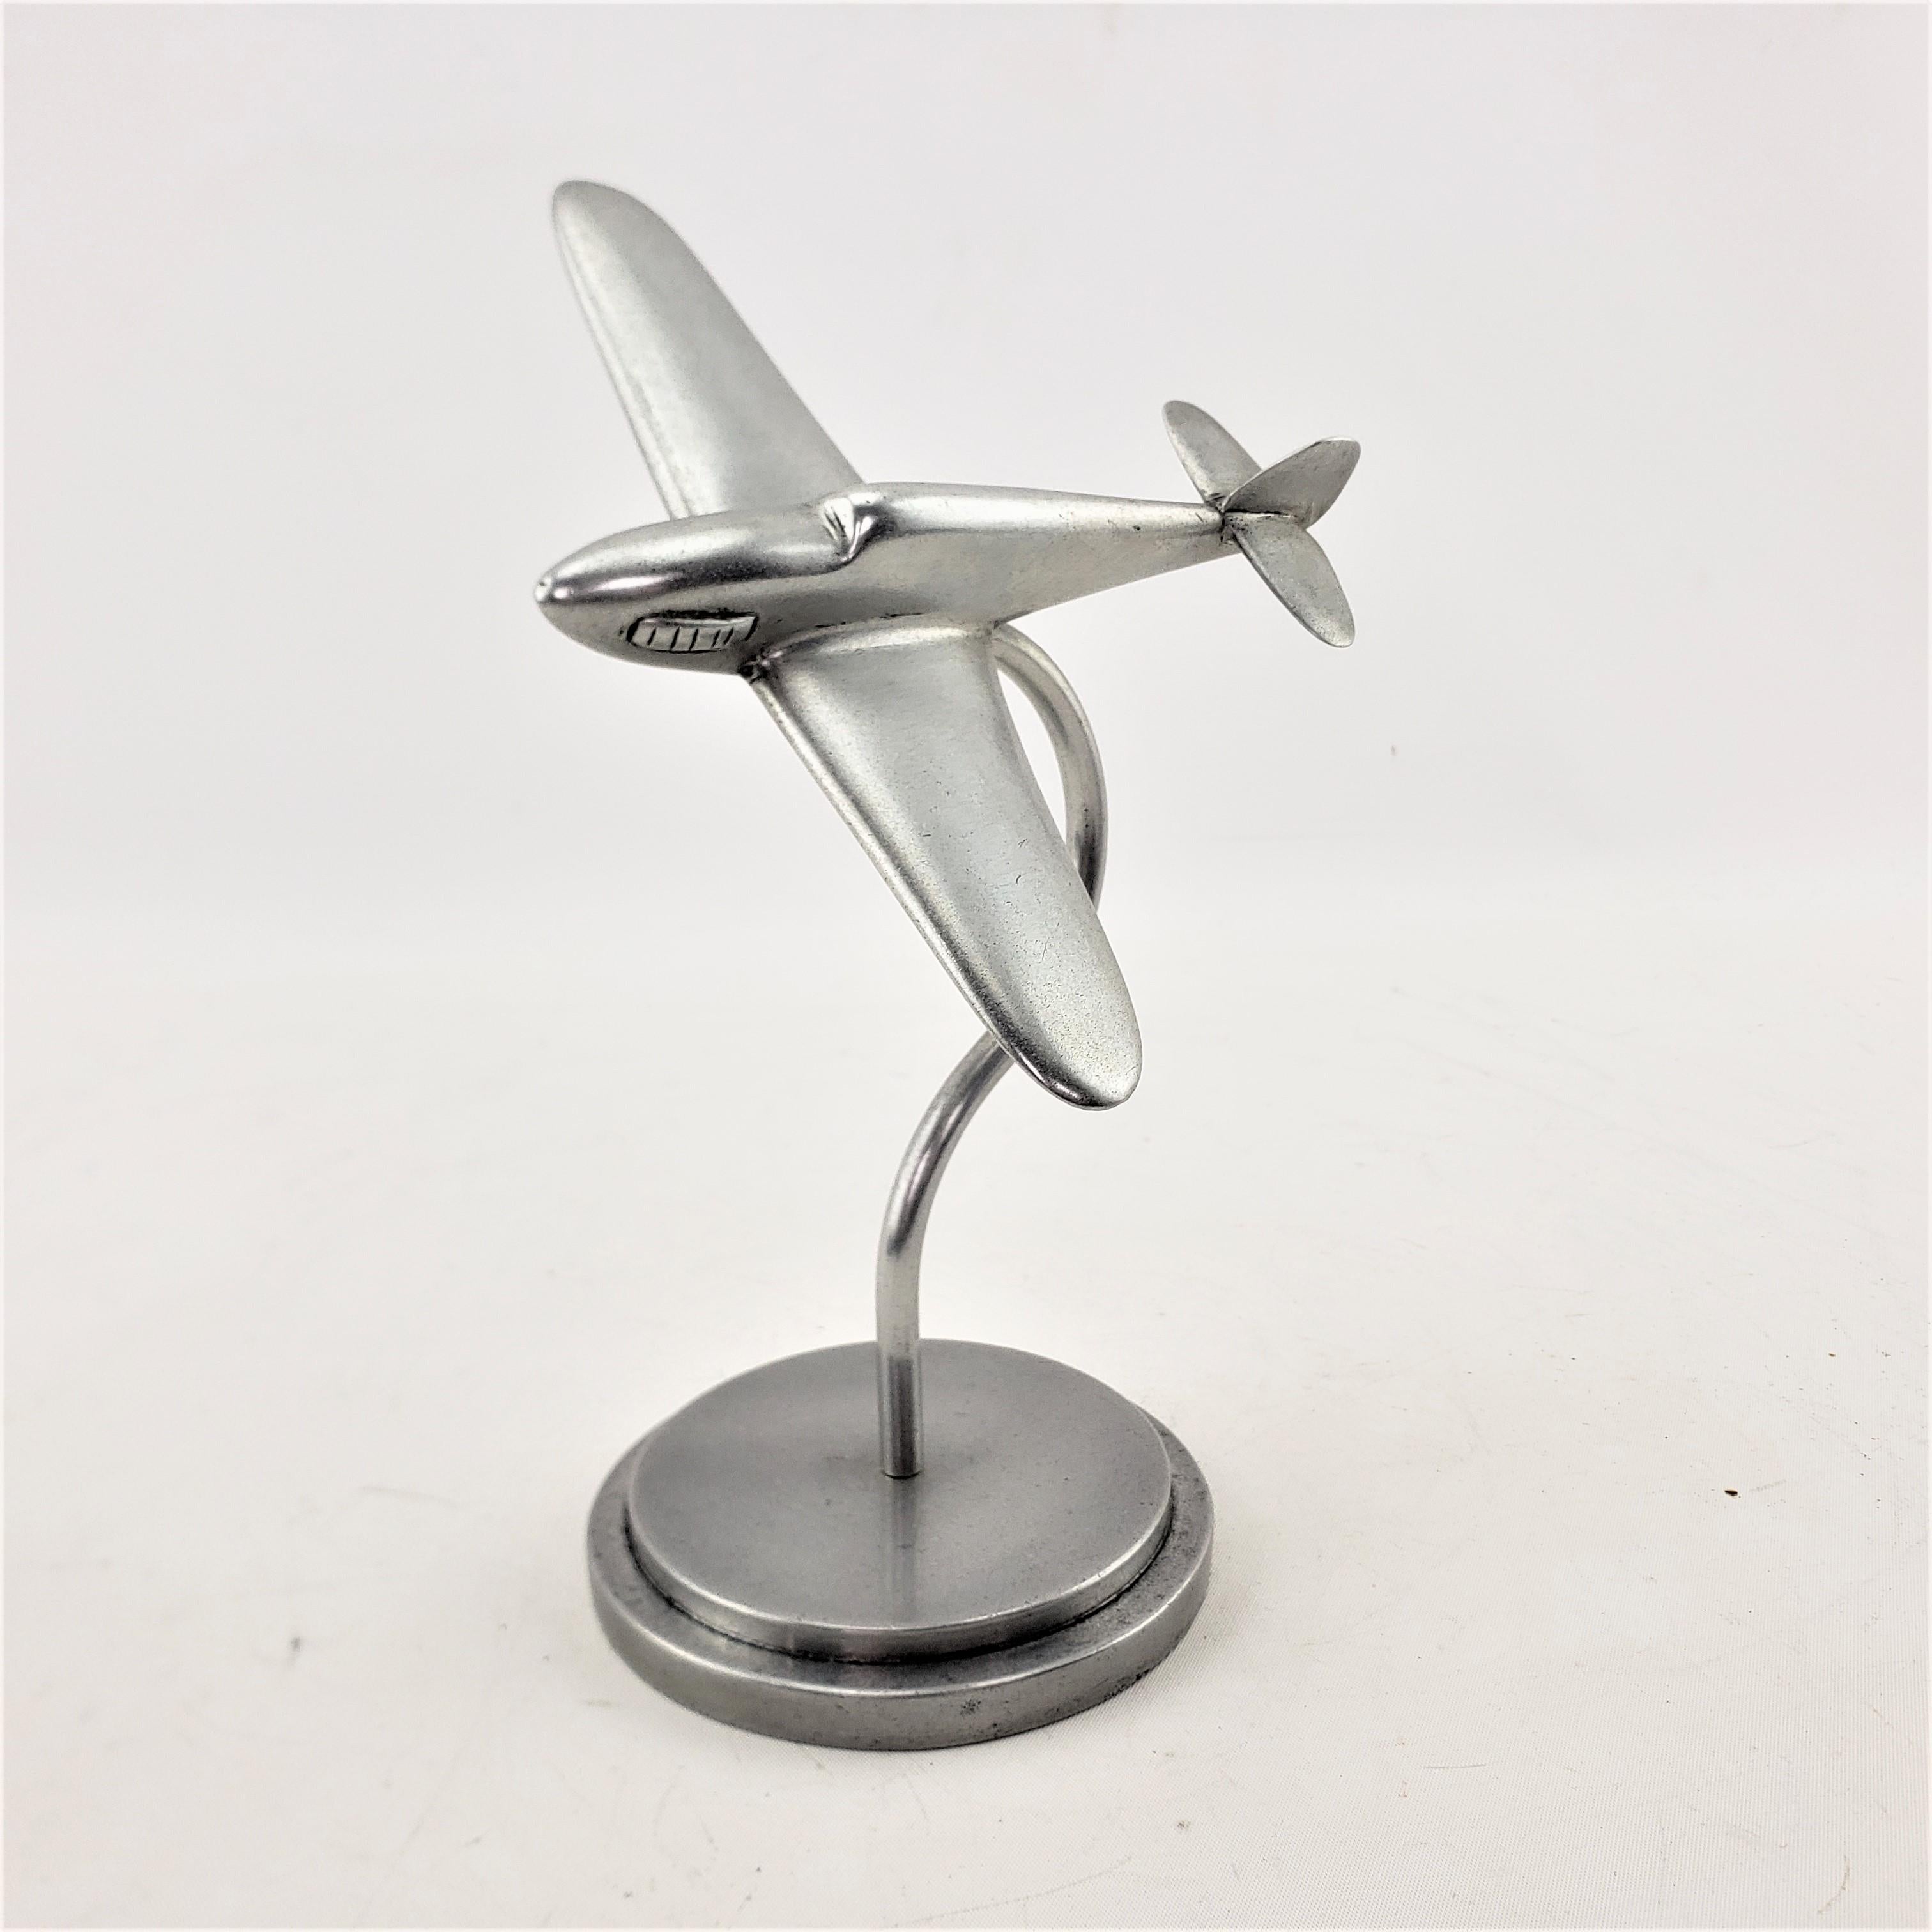 Art Deco Cast Aluminum Stylized Fighter Airplane Model or Sculpture & Stand 1